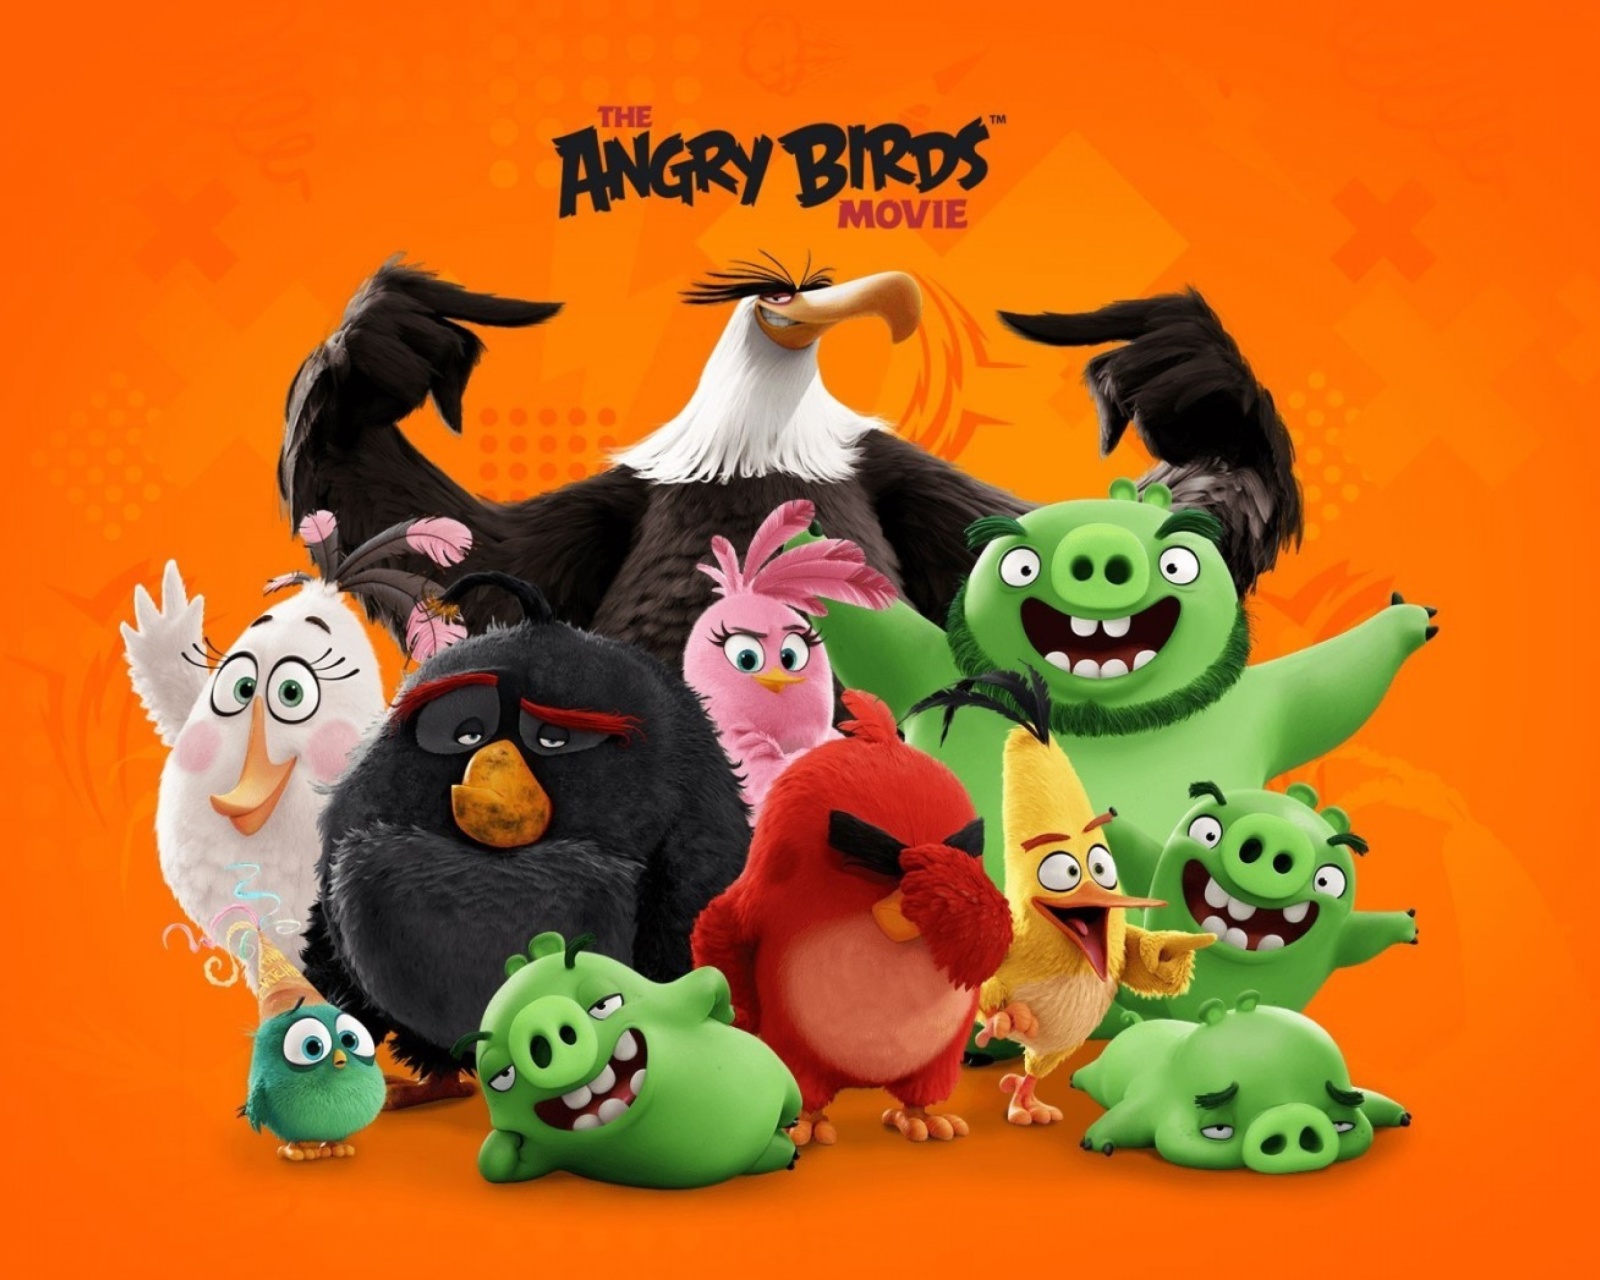 Angry Birds the Movie Release by Rovio wallpaper 1600x1280